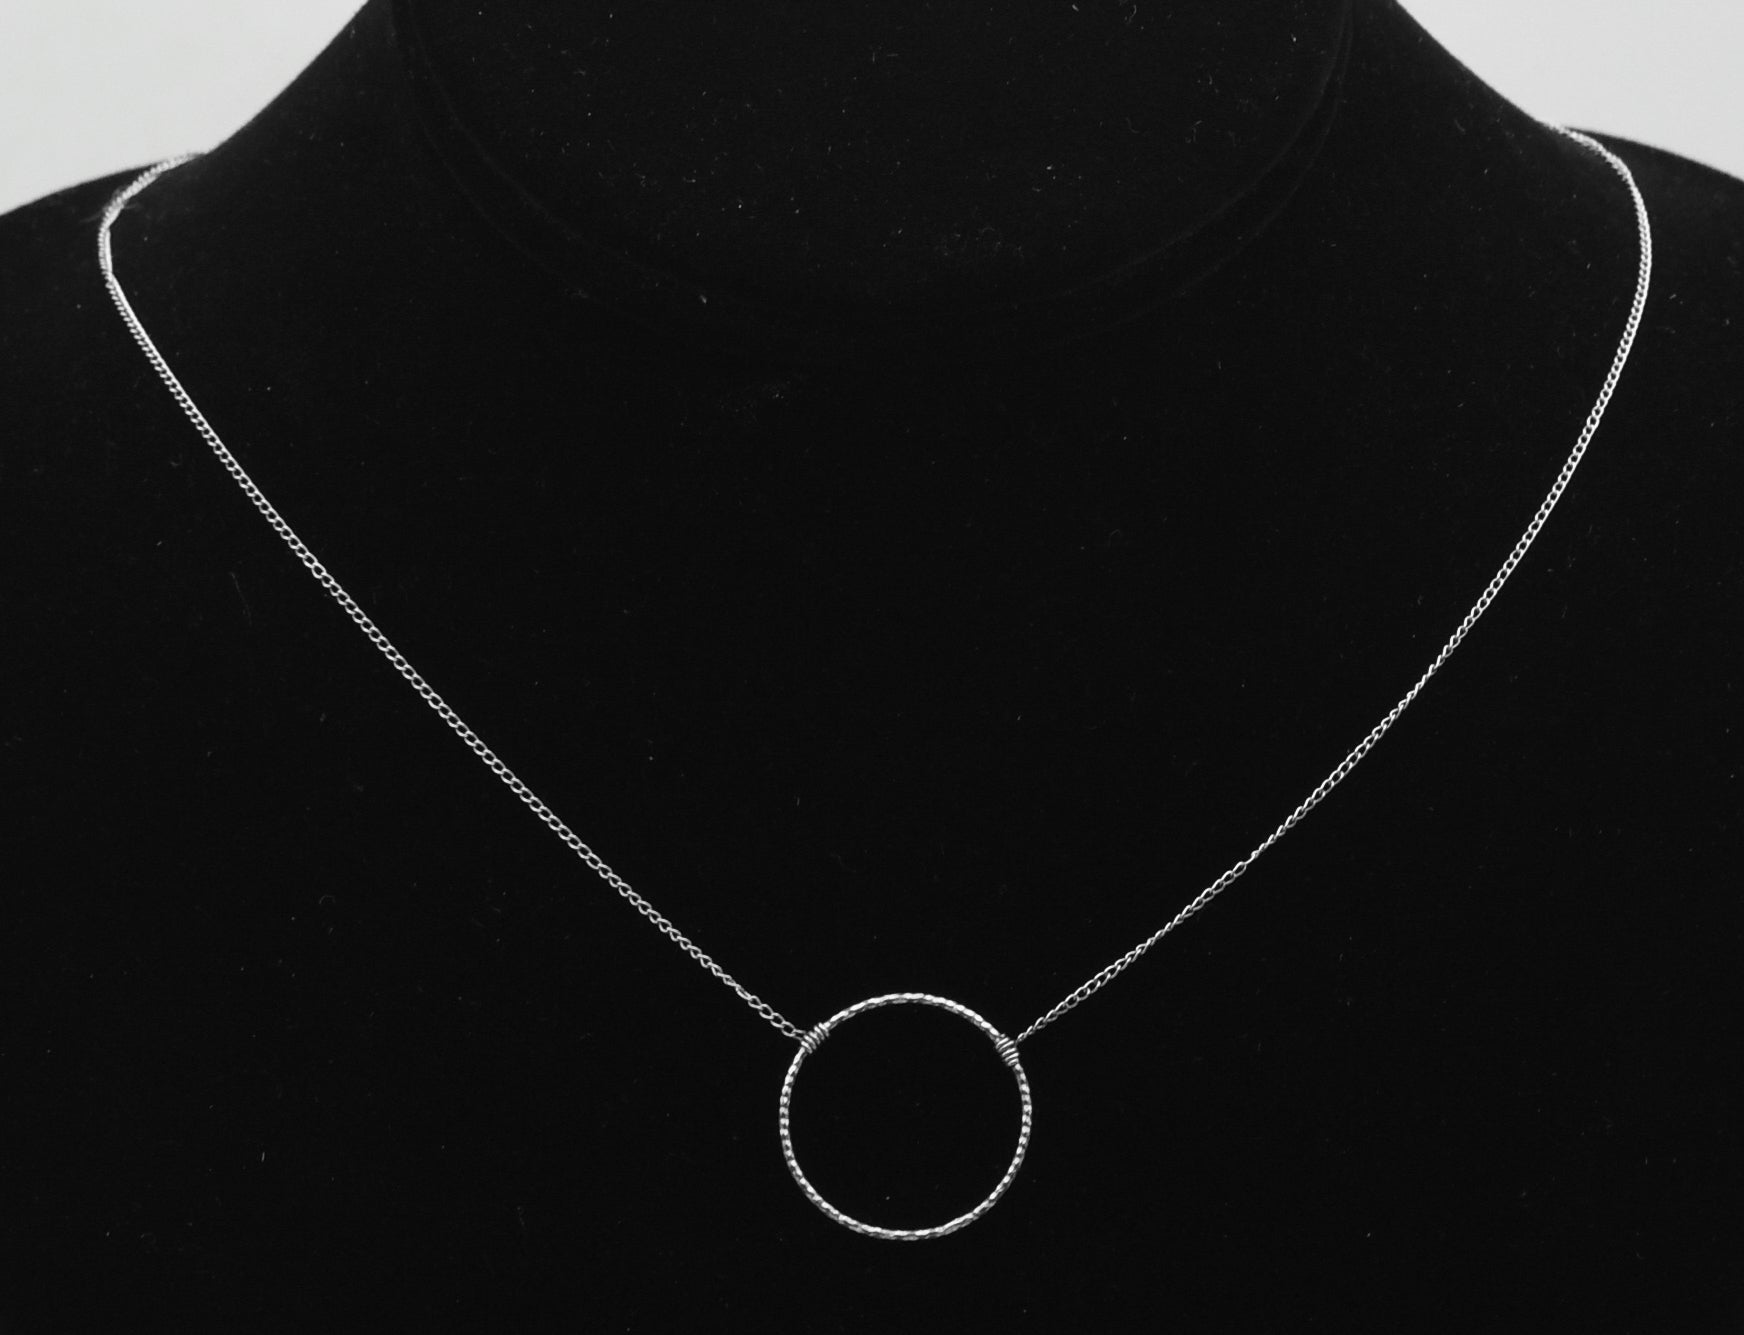 Vintage Sterling Silver Hoop Pendant Chain Necklace - 18.5"